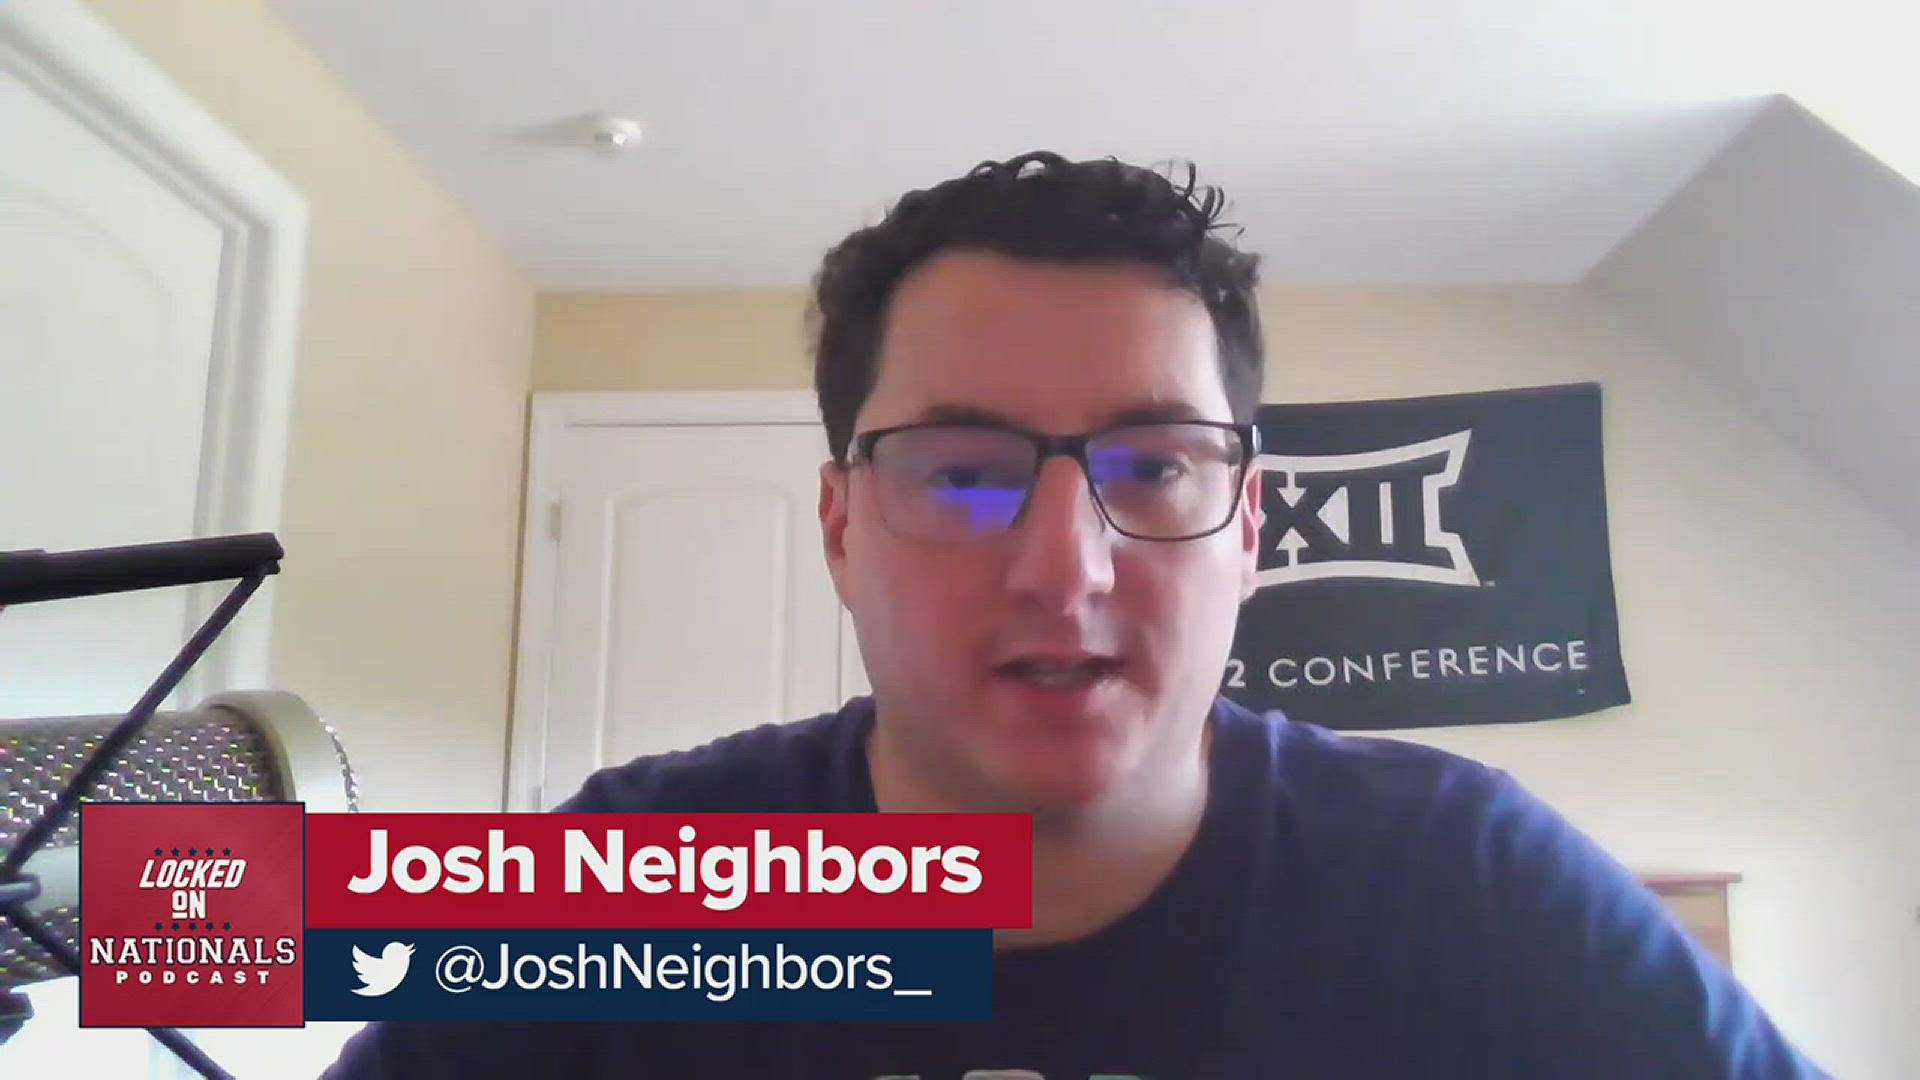 Locked On's Josh Neighbors gives his thoughts on a recent report that says the Washington Nationals are considering trading Juan Soto.